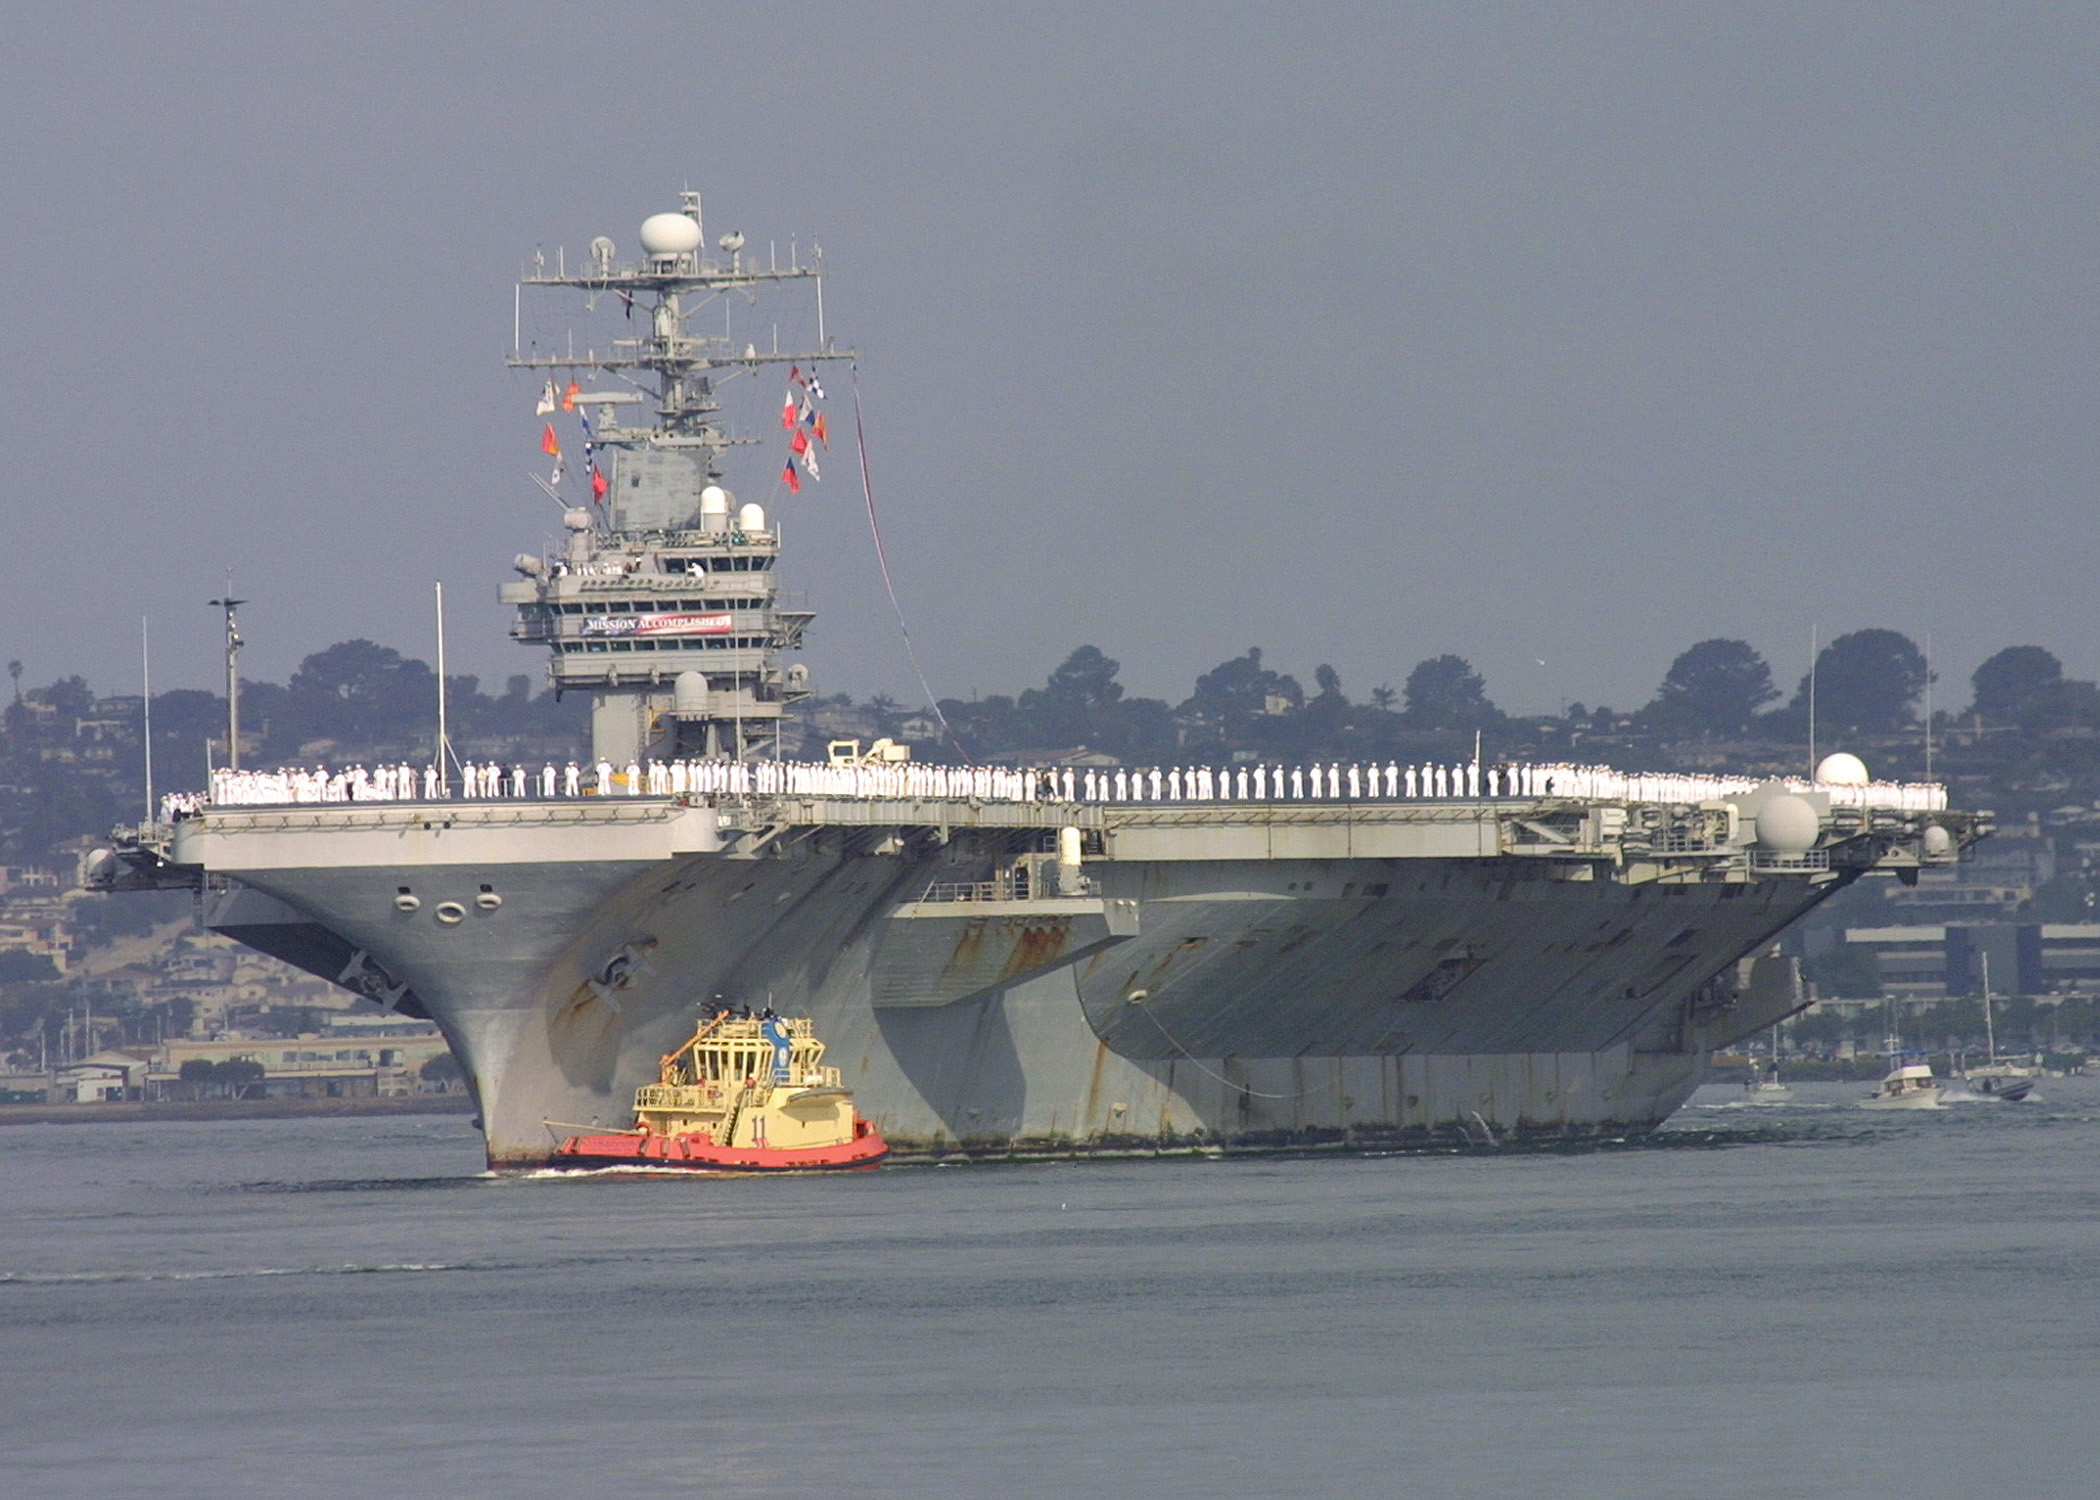 US Navy 030502-N-1144C-002 The aircraft carrier USS Abraham Lincoln (CVN 72) pulls into San Diego Harbor